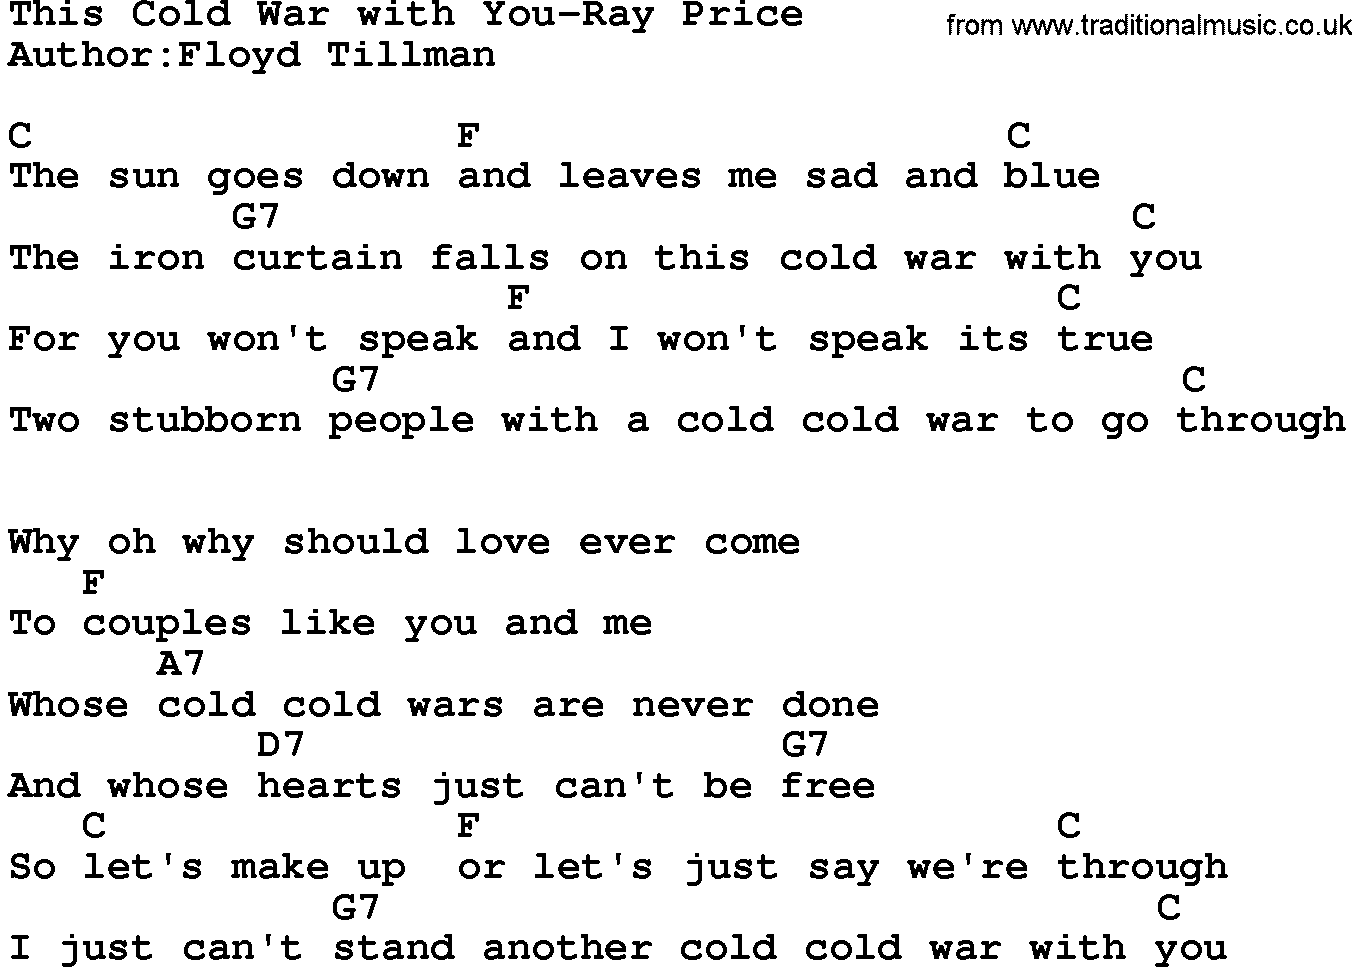 Country music song: This Cold War With You-Ray Price lyrics and chords